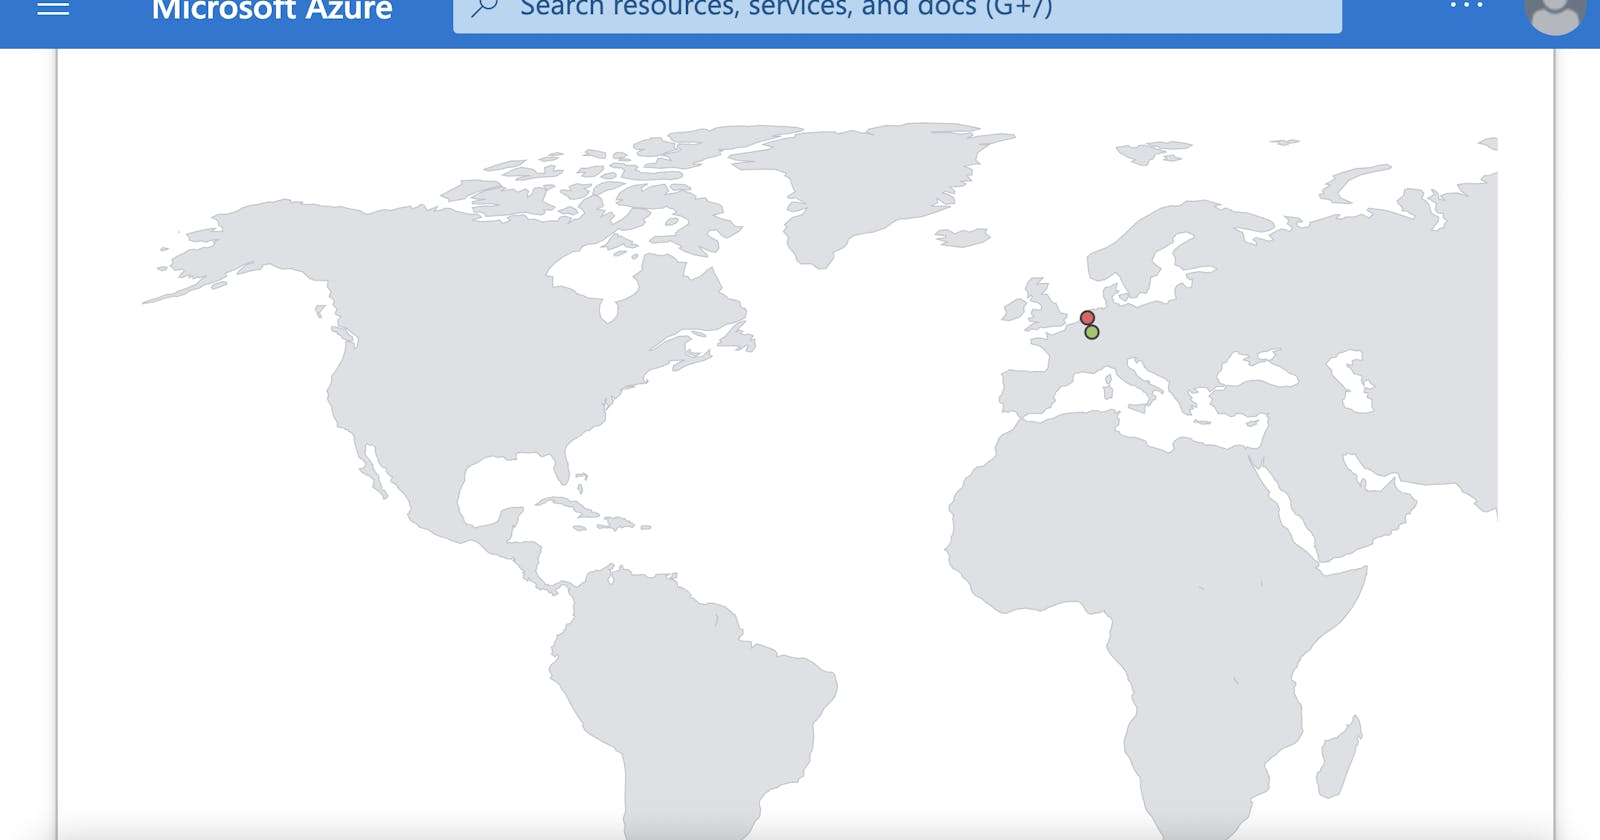 Azure Sentinel Map with Live Attack Data